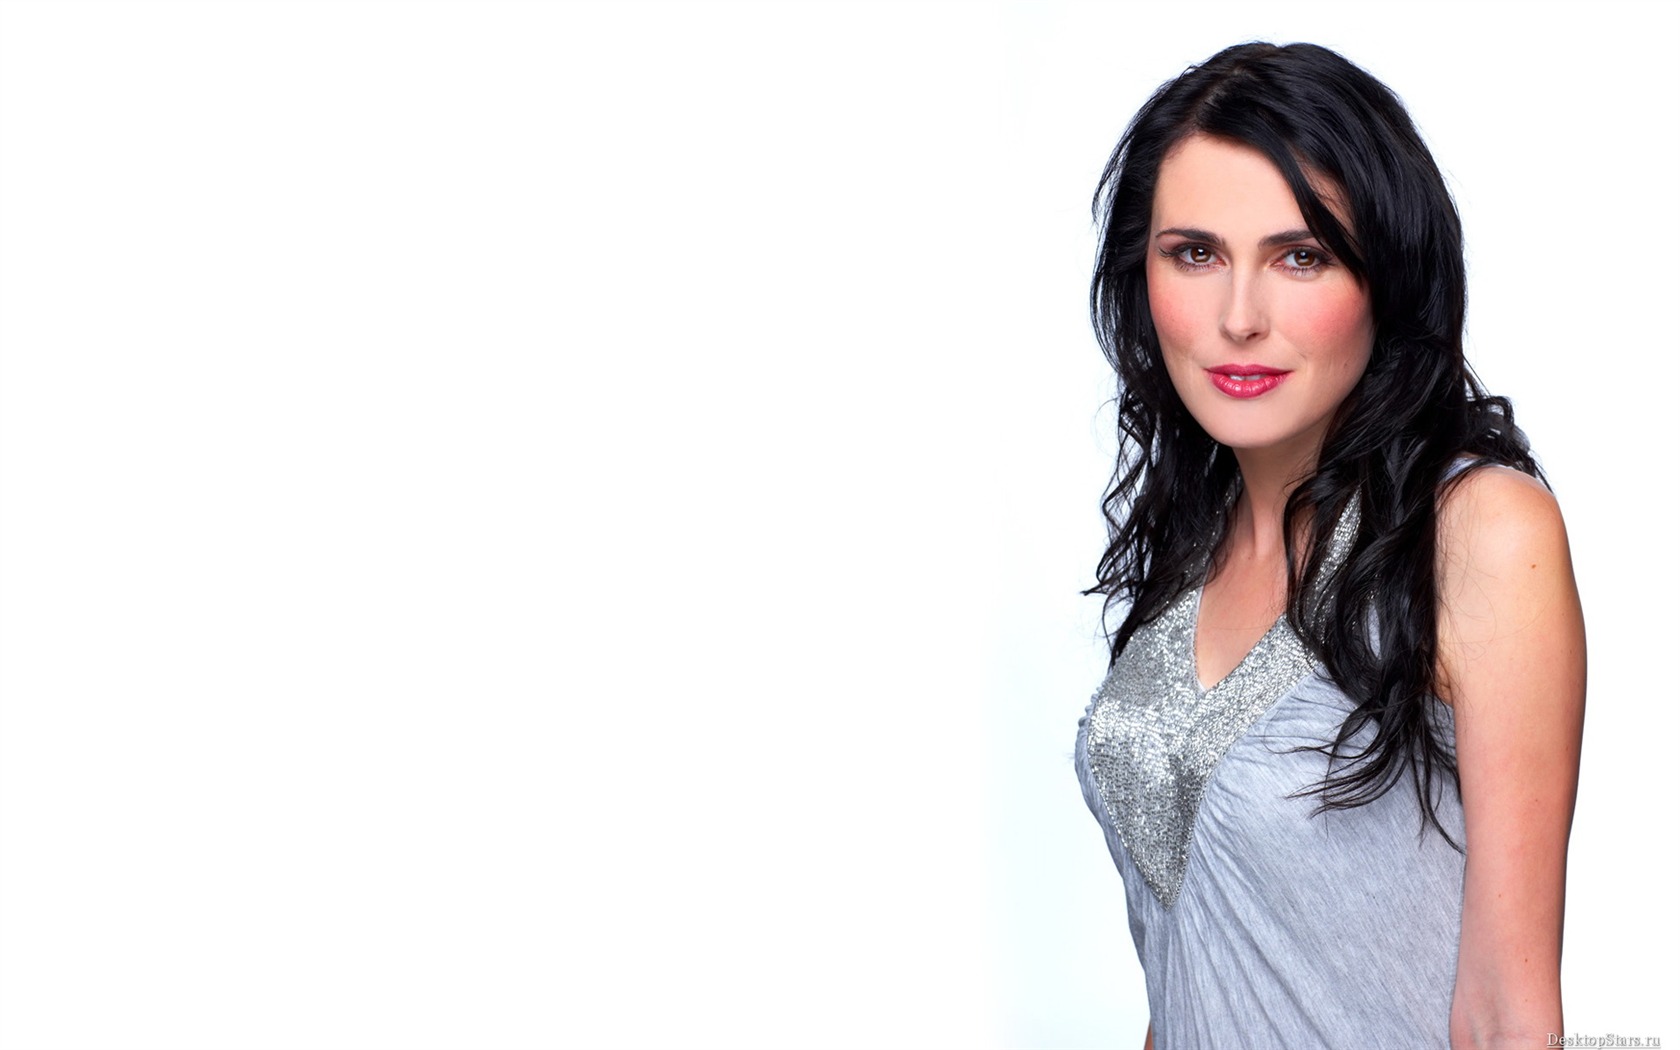 Sharon den Adel #007 - 1680x1050 Wallpapers Pictures Photos Images